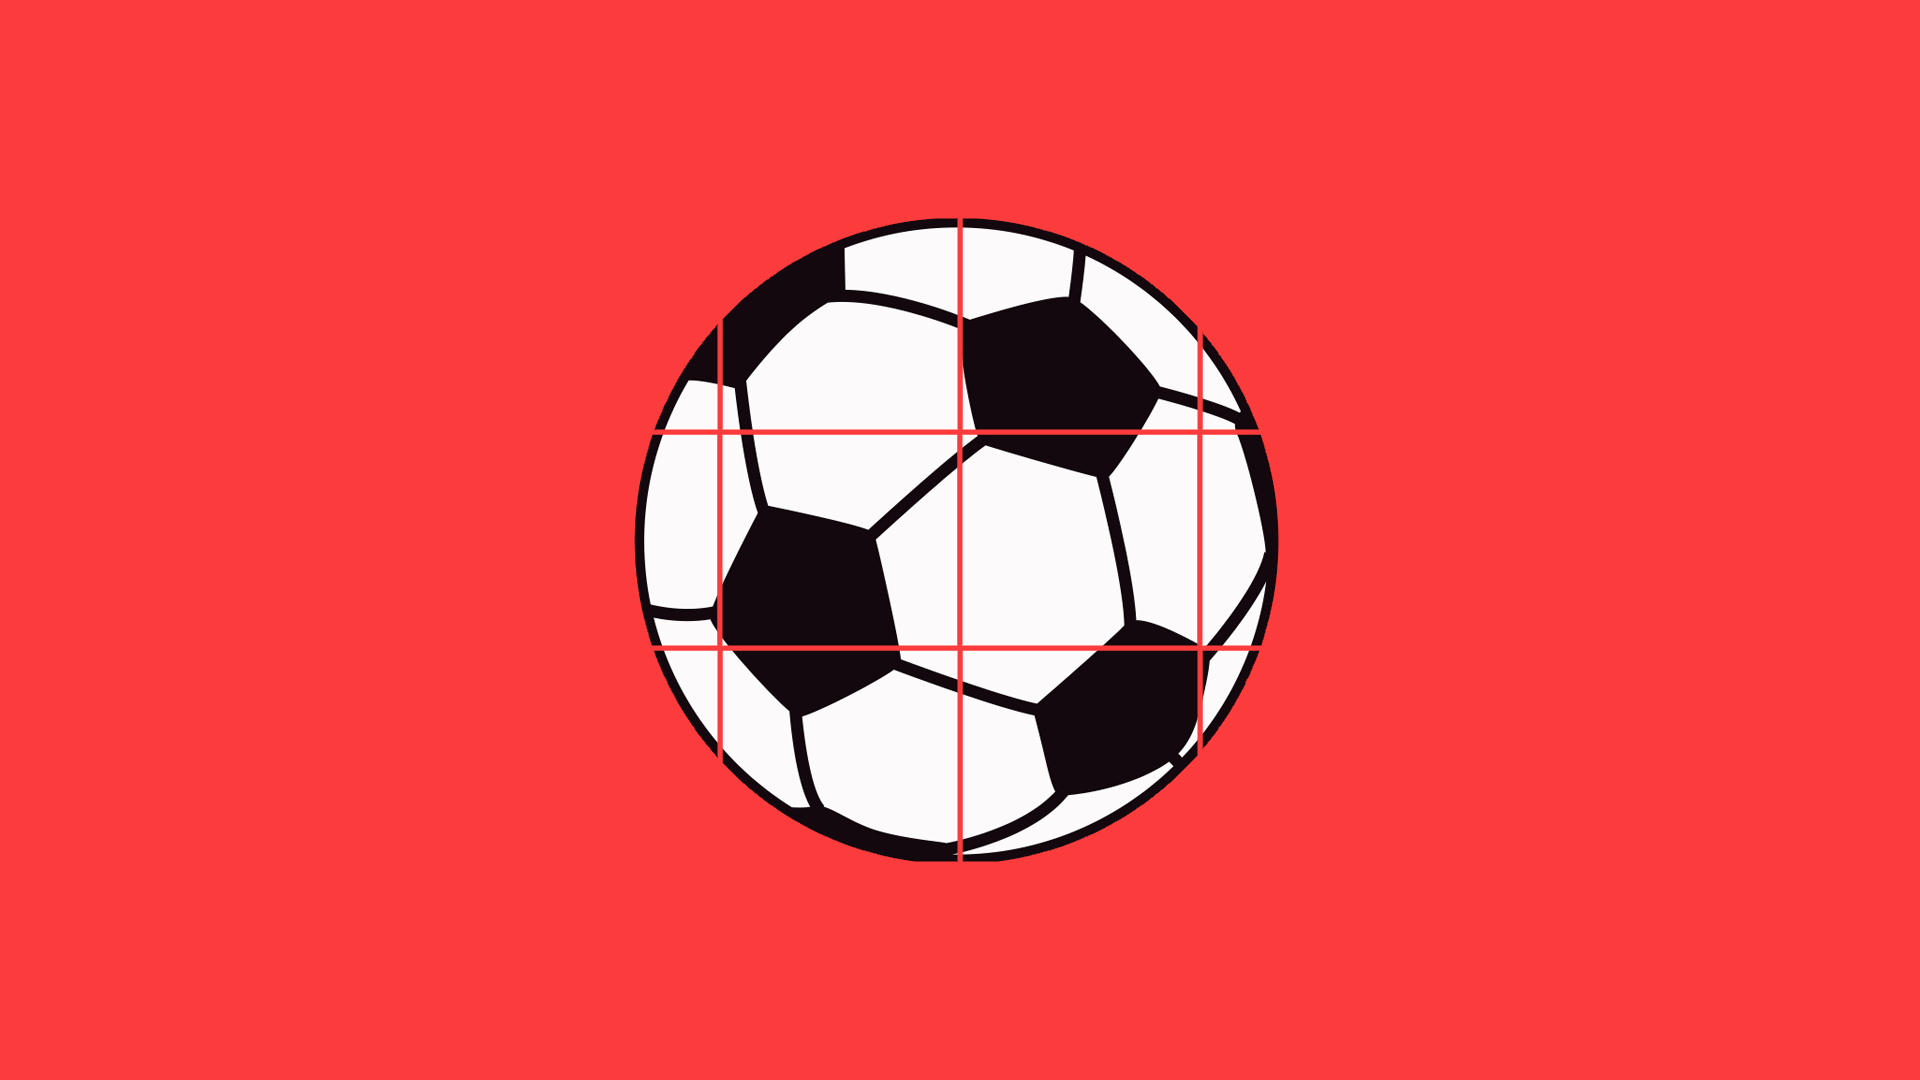 Illustration of a soccer ball broken up into small pieces and rearranged